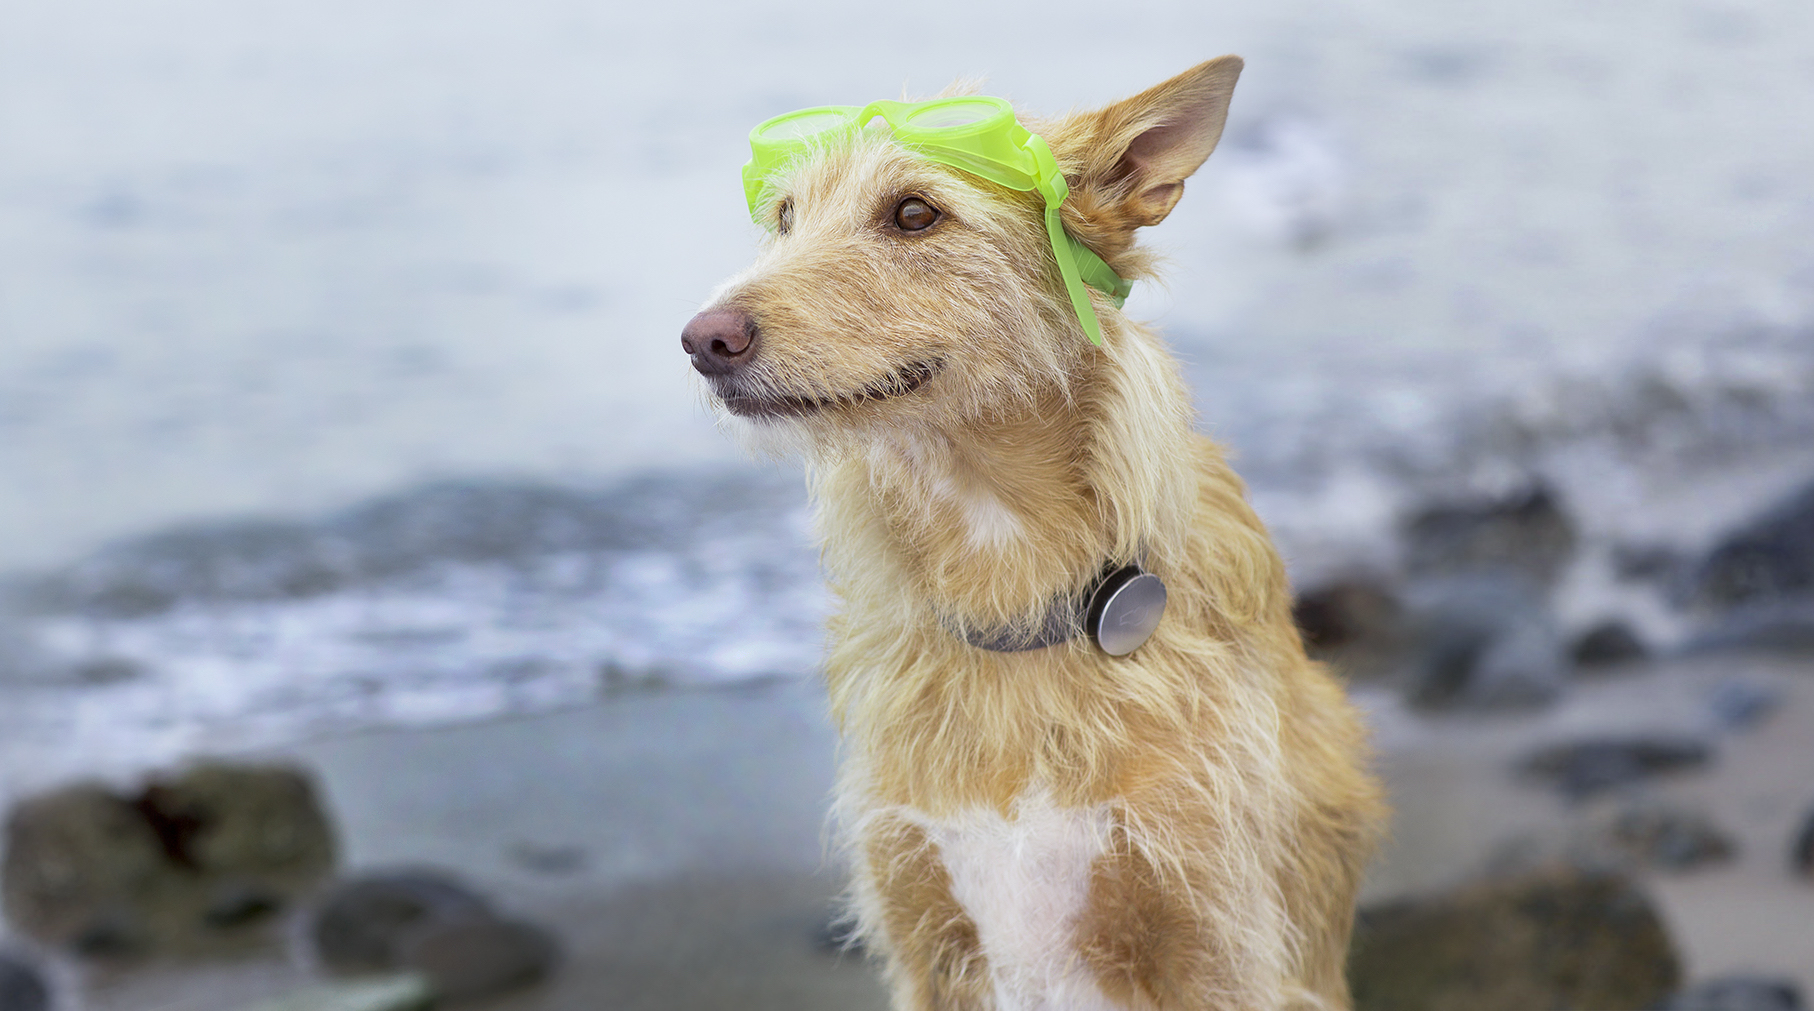 Fitbit For Dogs' Maker Whistle Acquires Tagg Tracker And Raises $15M | TechCrunch